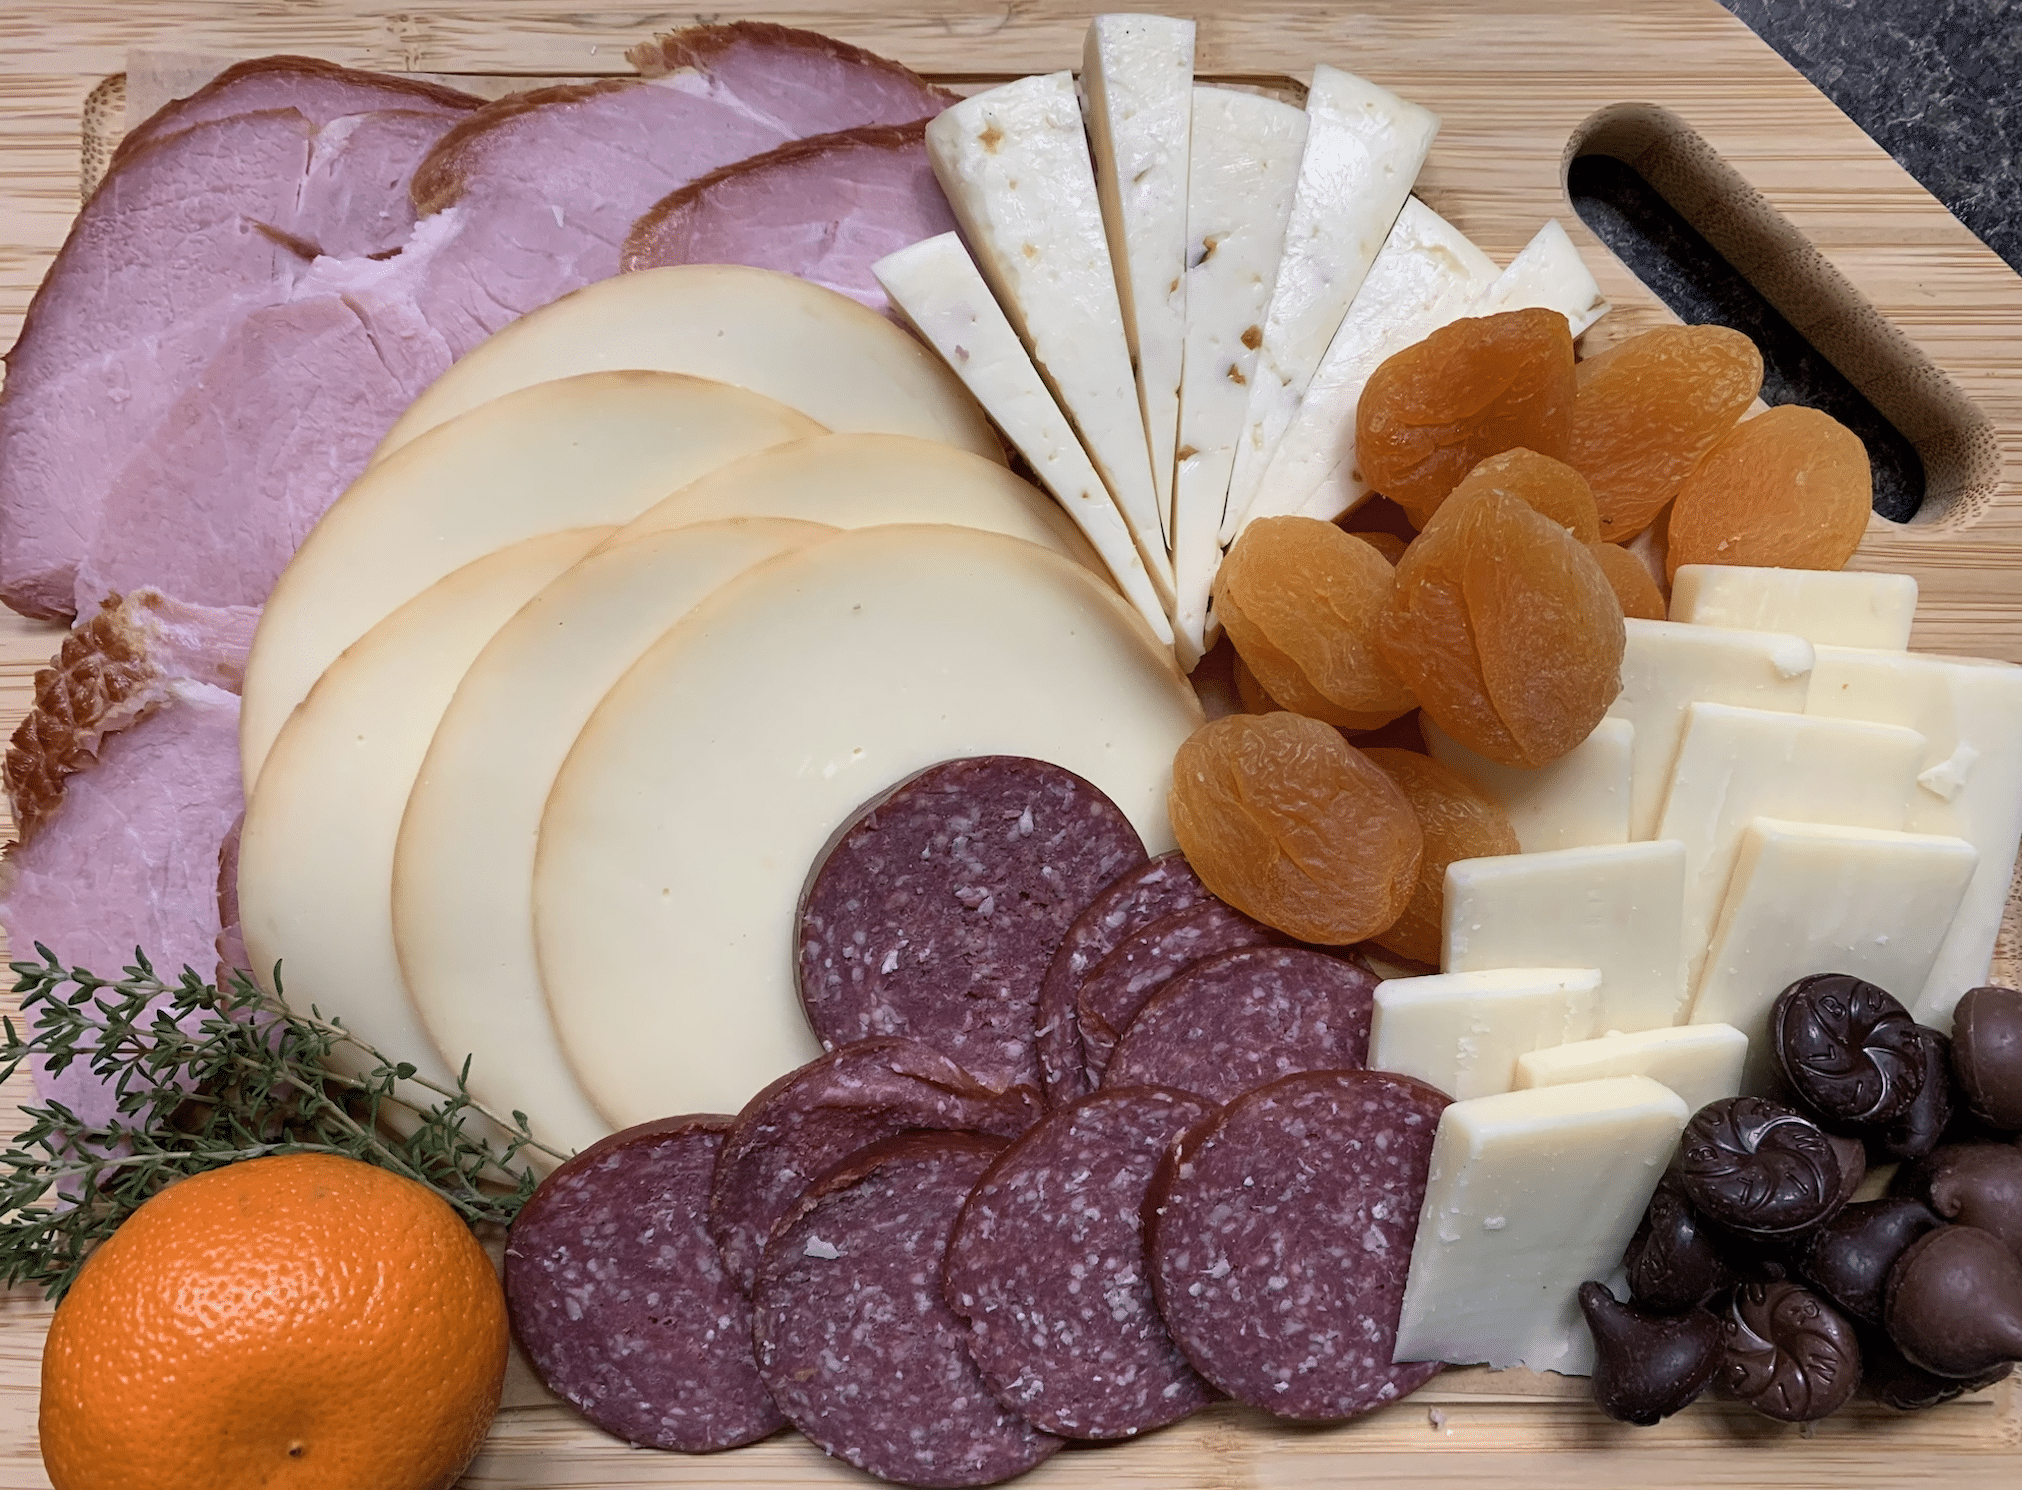 Charcuterie board filled with delicious dried meats, cheeses fruits, chocolates and more.